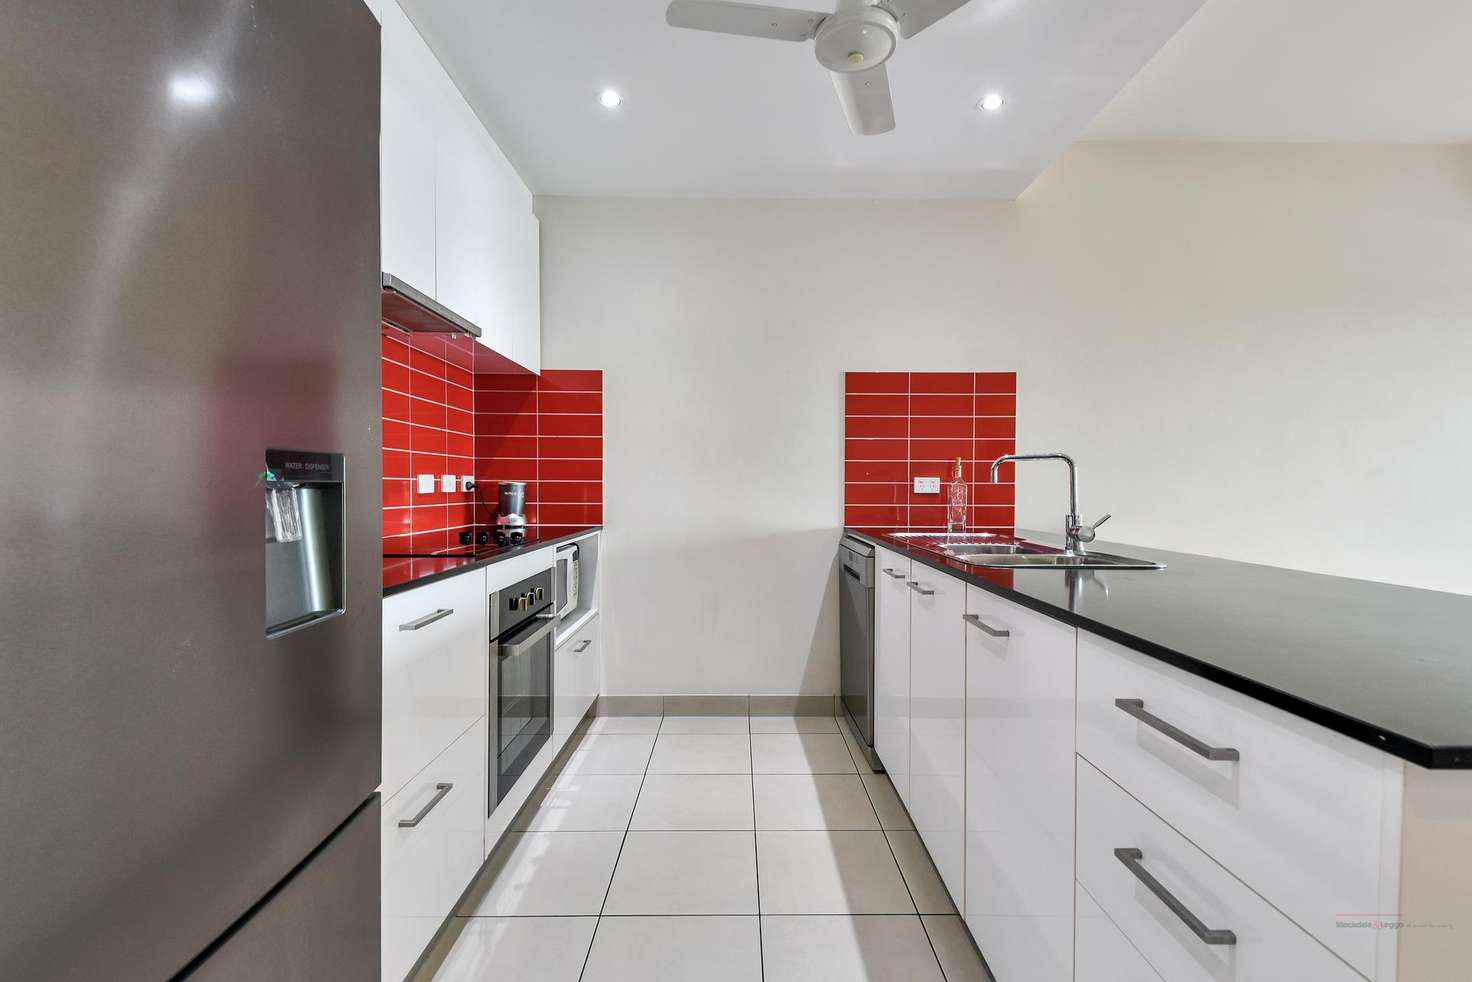 Main view of Homely apartment listing, 5302/2 Brisbane, Johnston NT 832